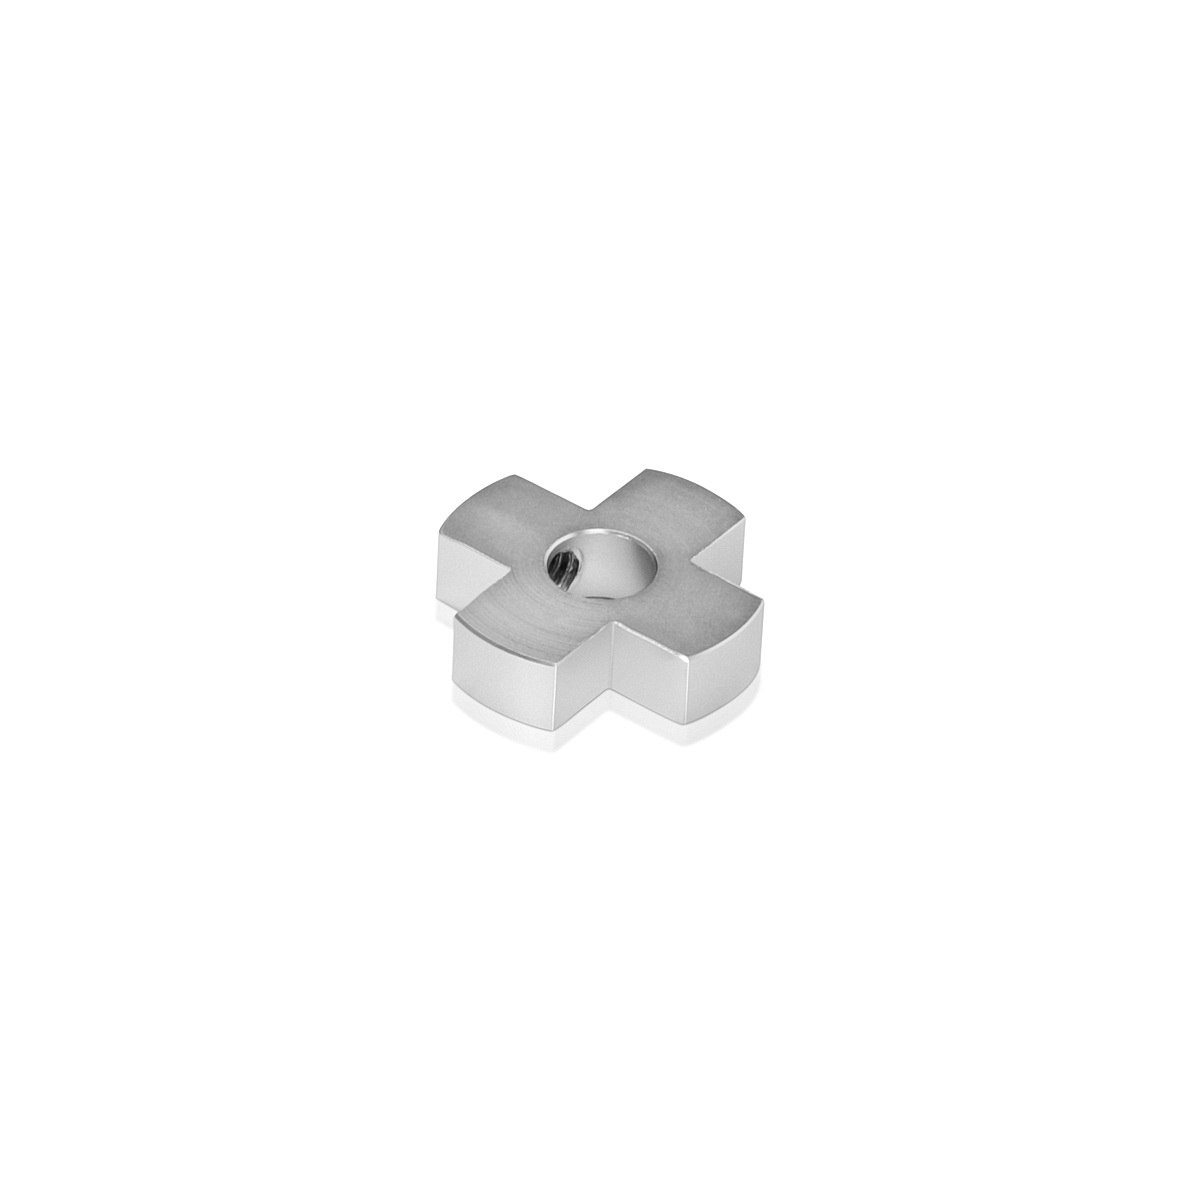 4-Way Standoffs Hub, Diameter: 1'', Thickness: 1/4'', Clear Anodized Aluminum [Required Material Hole Size: 7/16'']